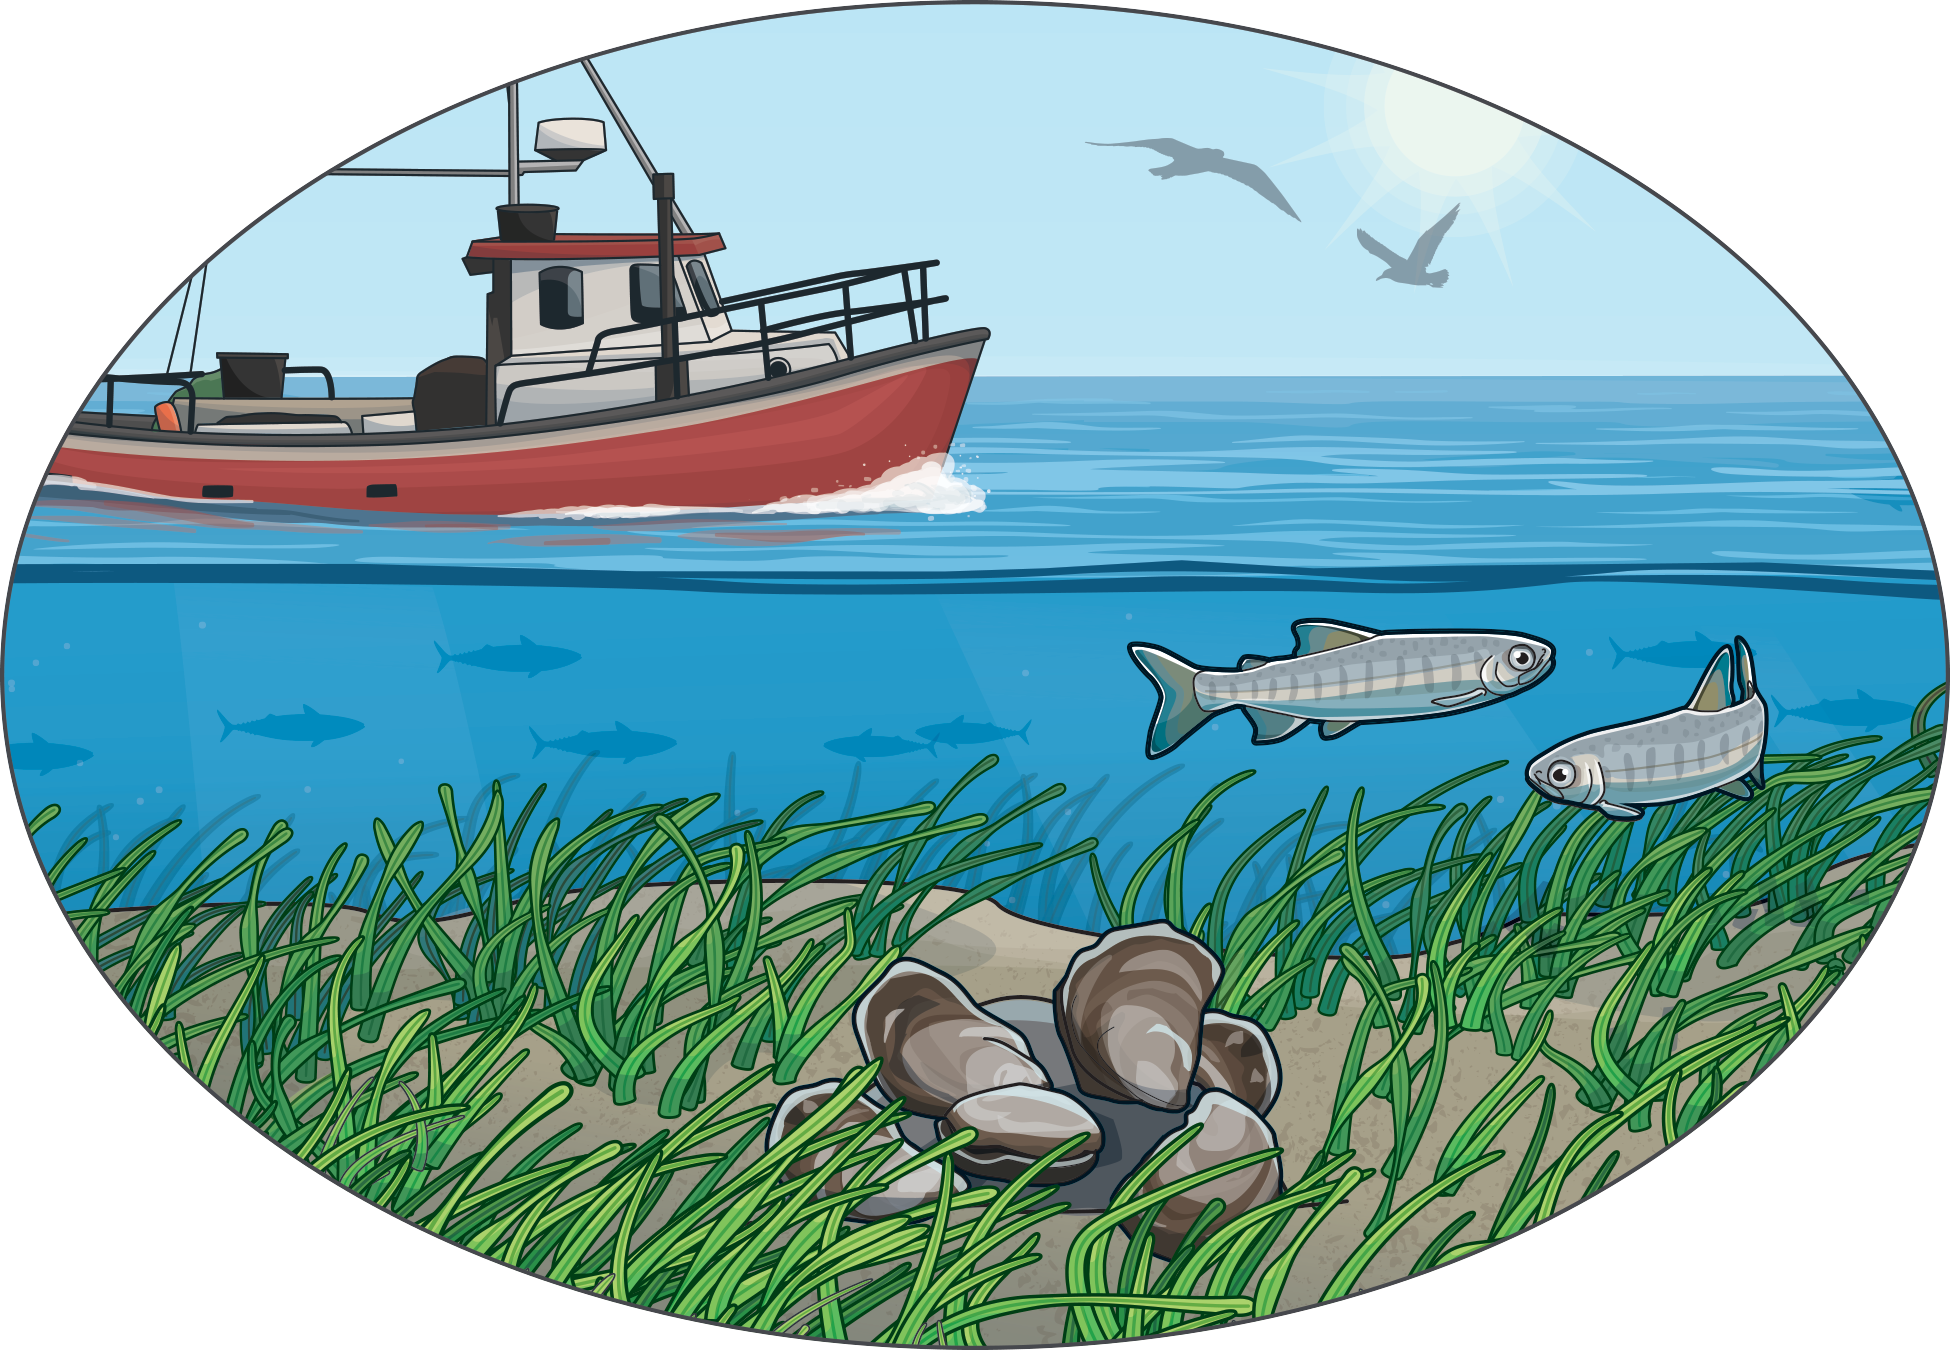 An illustration of a fishing boat and fish swimming under the water